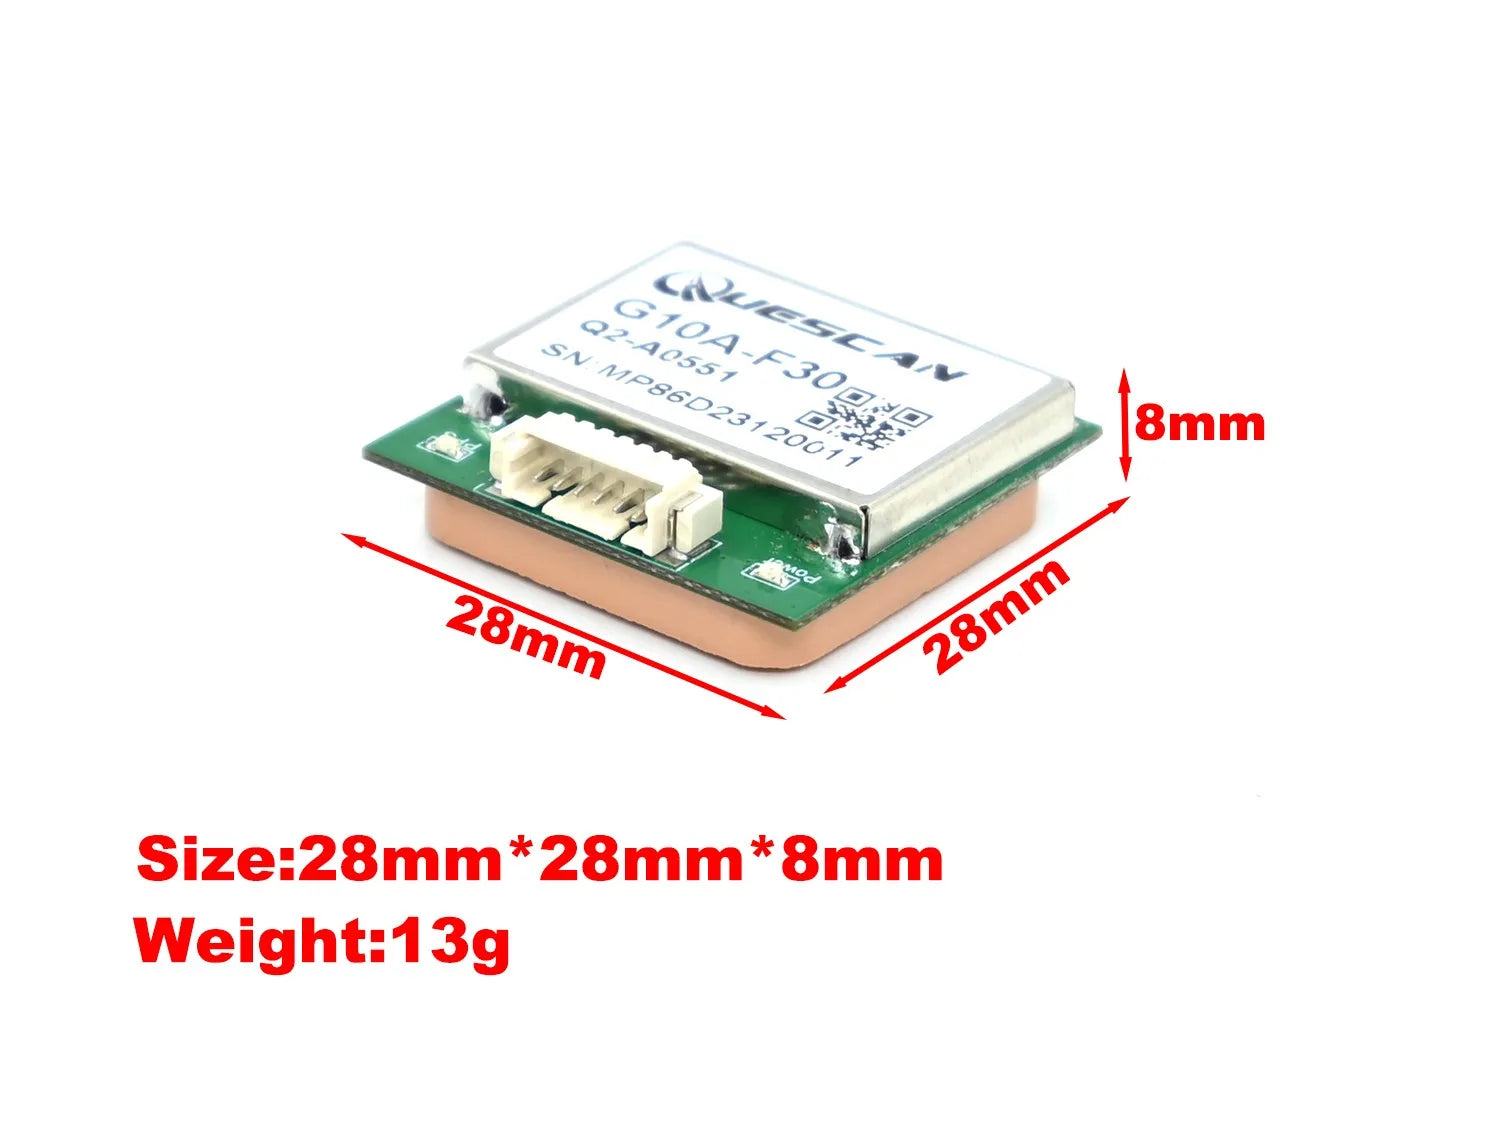 QUESCAN UBX M10050 M10 GNSS Module, Picture Show Packing List G10A-F30 module*1 Pin out cable*